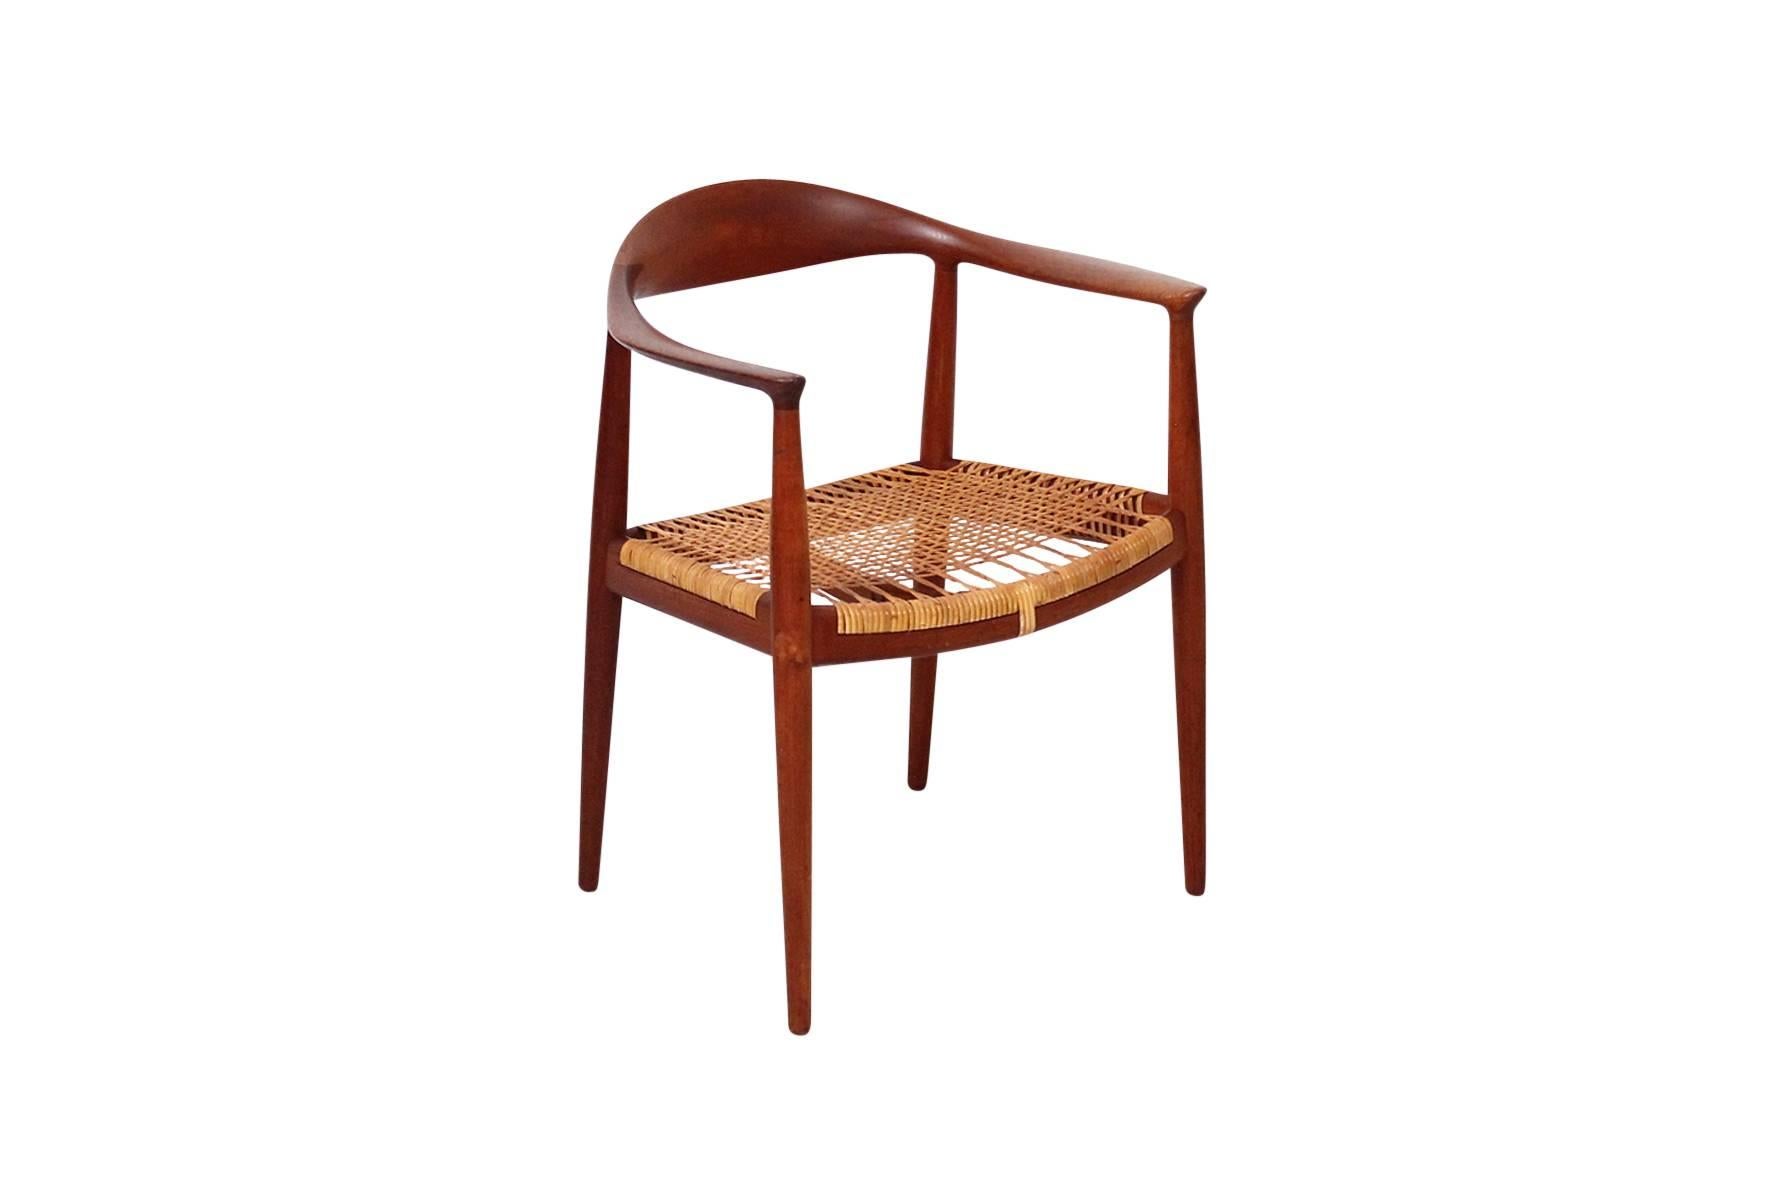 Single teak and cane Classic "The Chair" or "Round" chair by Hans Wegner for Danish cabinetmaker Johannes Hansen. Caned seat and sculptural teak backrest.
 